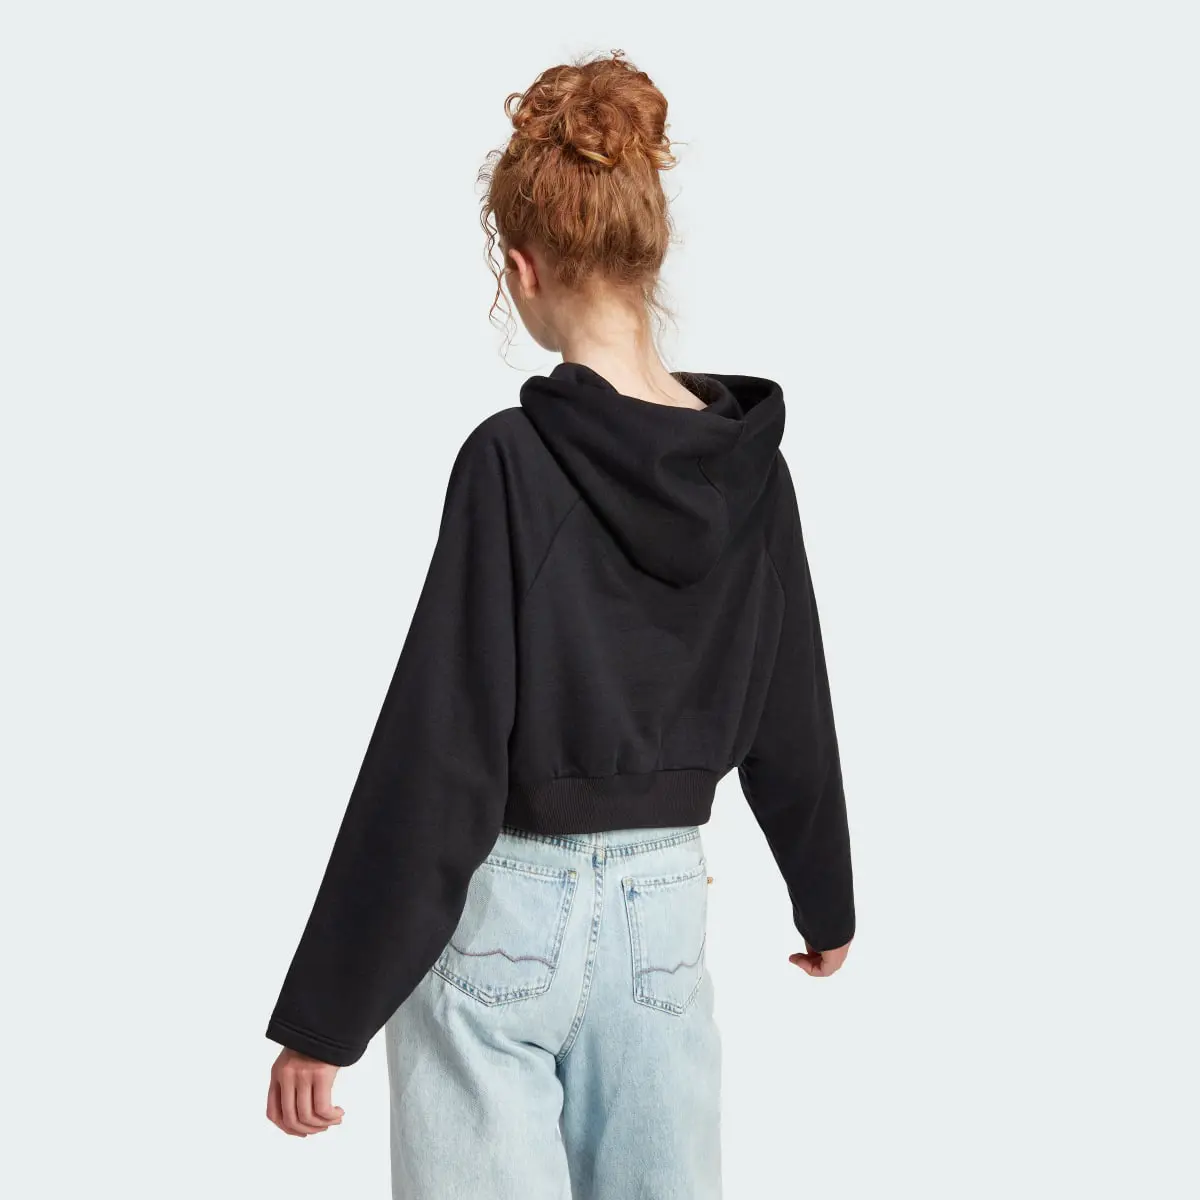 Adidas The Safe Place Crop Hoodie. 3